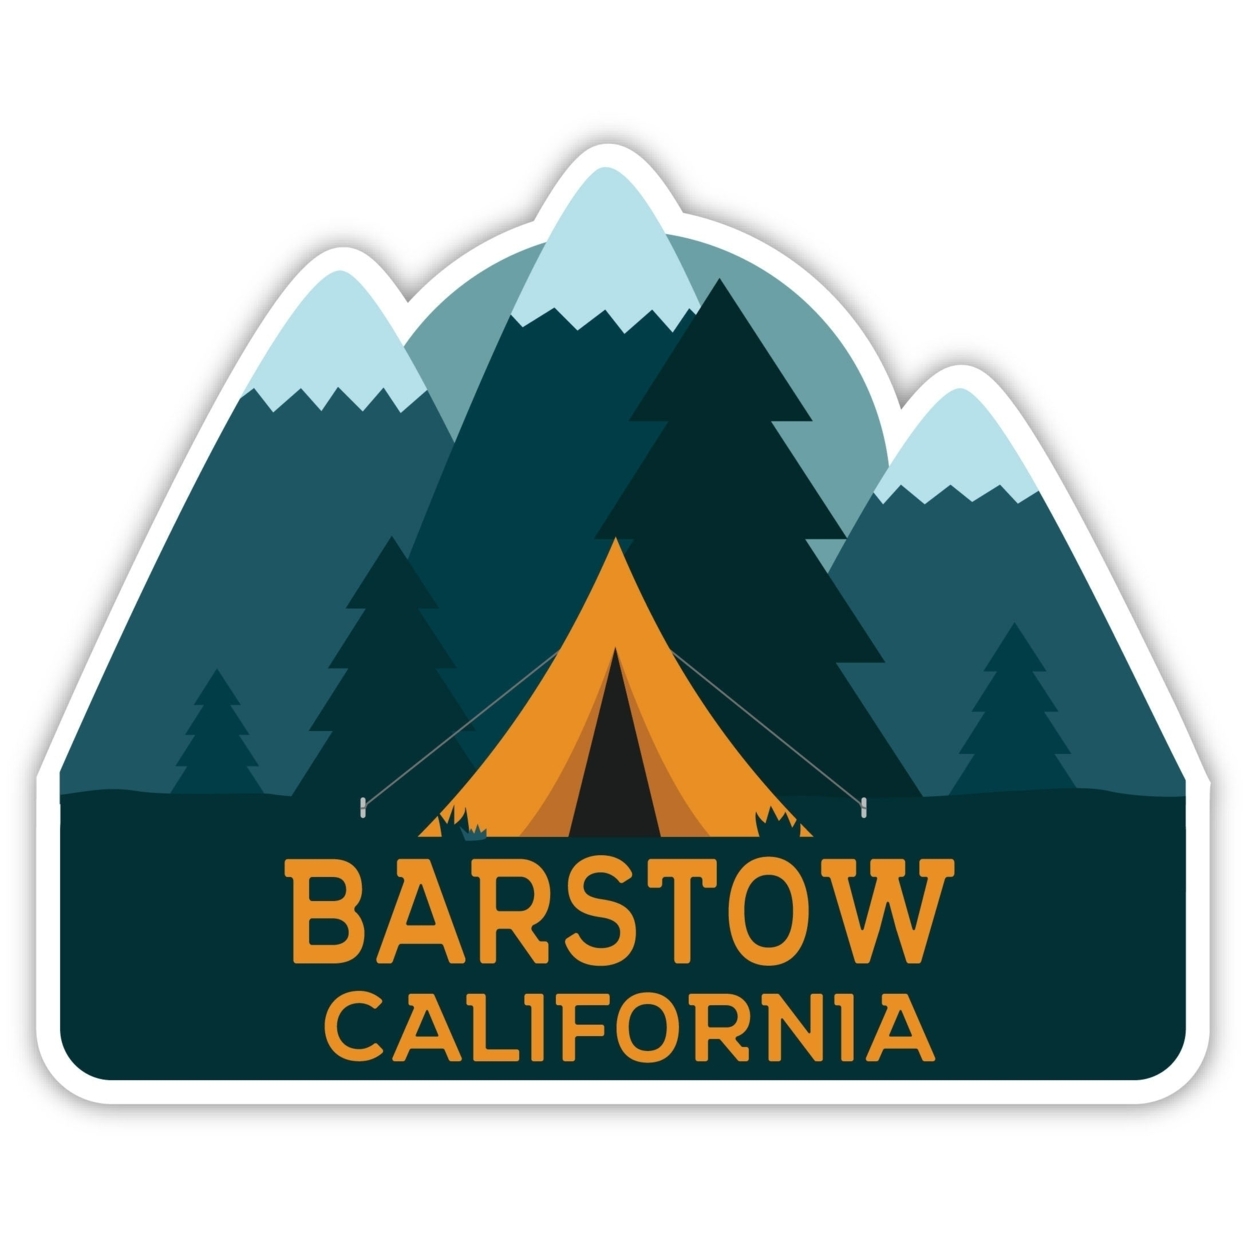 Barstow California Souvenir Decorative Stickers (Choose Theme And Size) - Single Unit, 8-Inch, Tent